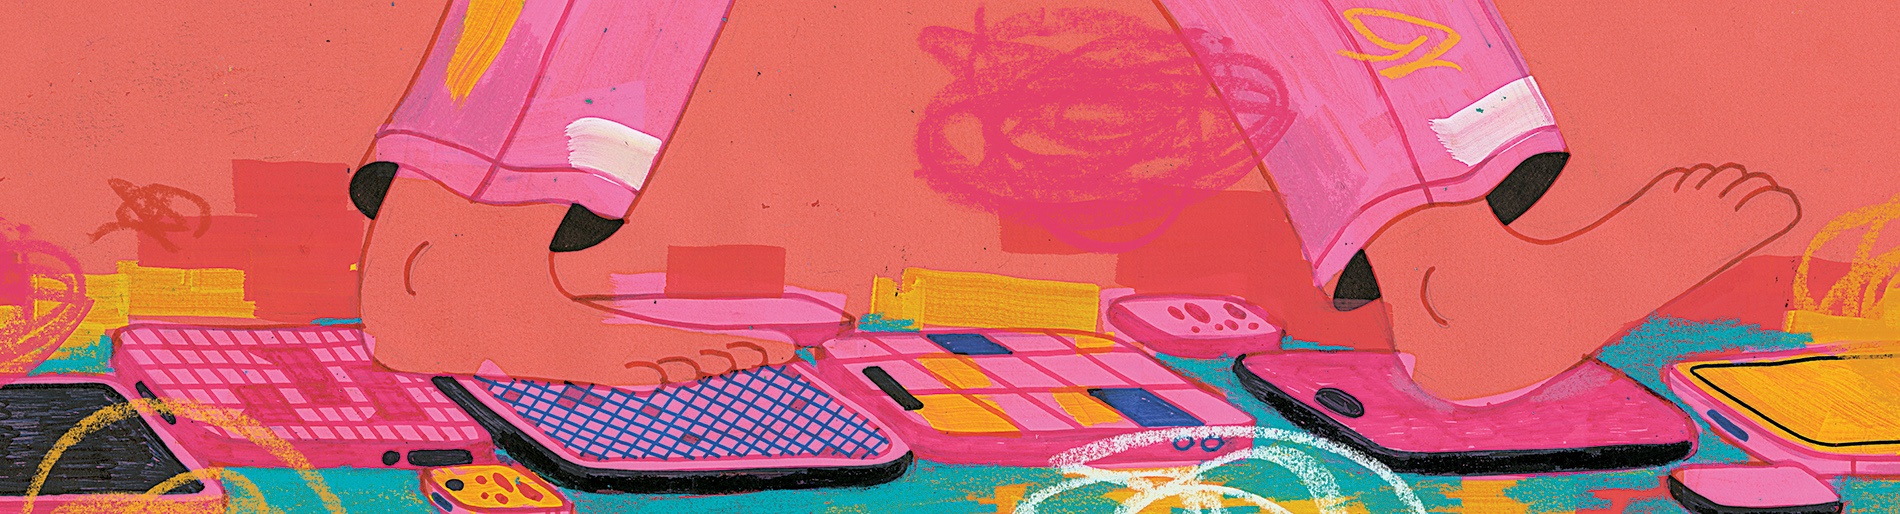 Illustration by Alex Eben Meyer of a food stepping on electronics.